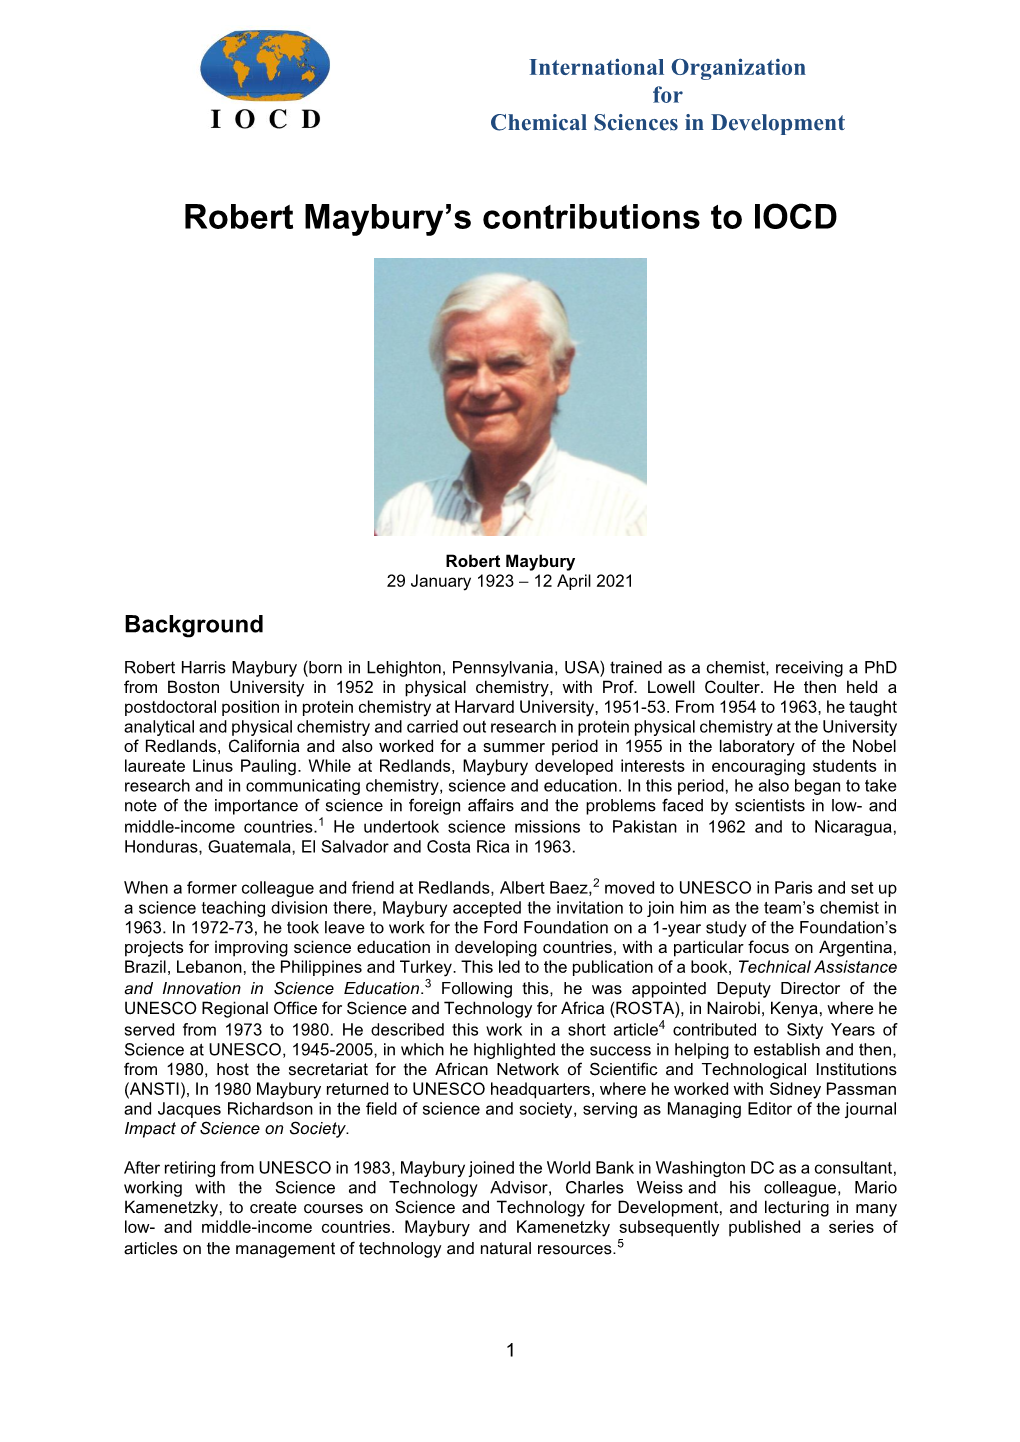 Robert Maybury's Contributions to IOCD